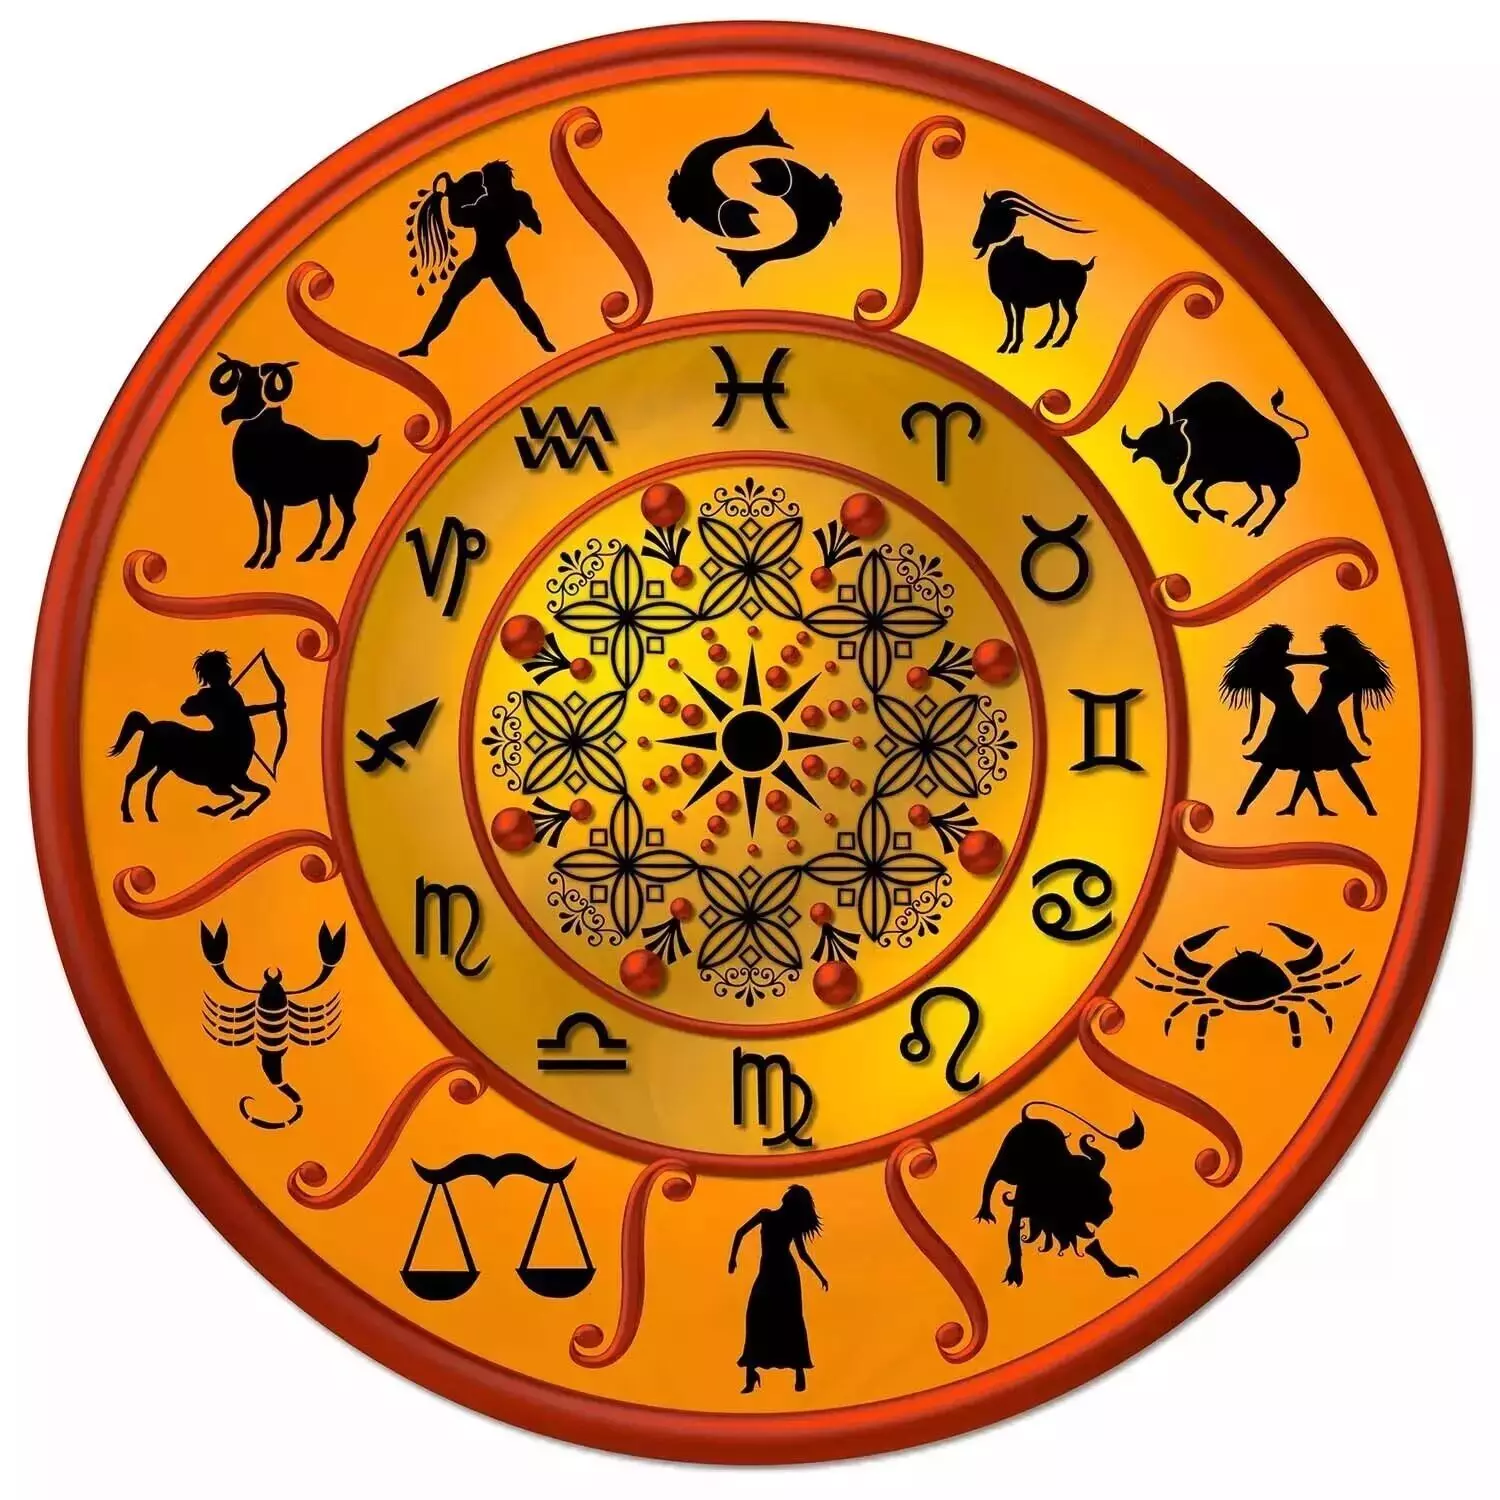 24 June  – Know your todays horoscope